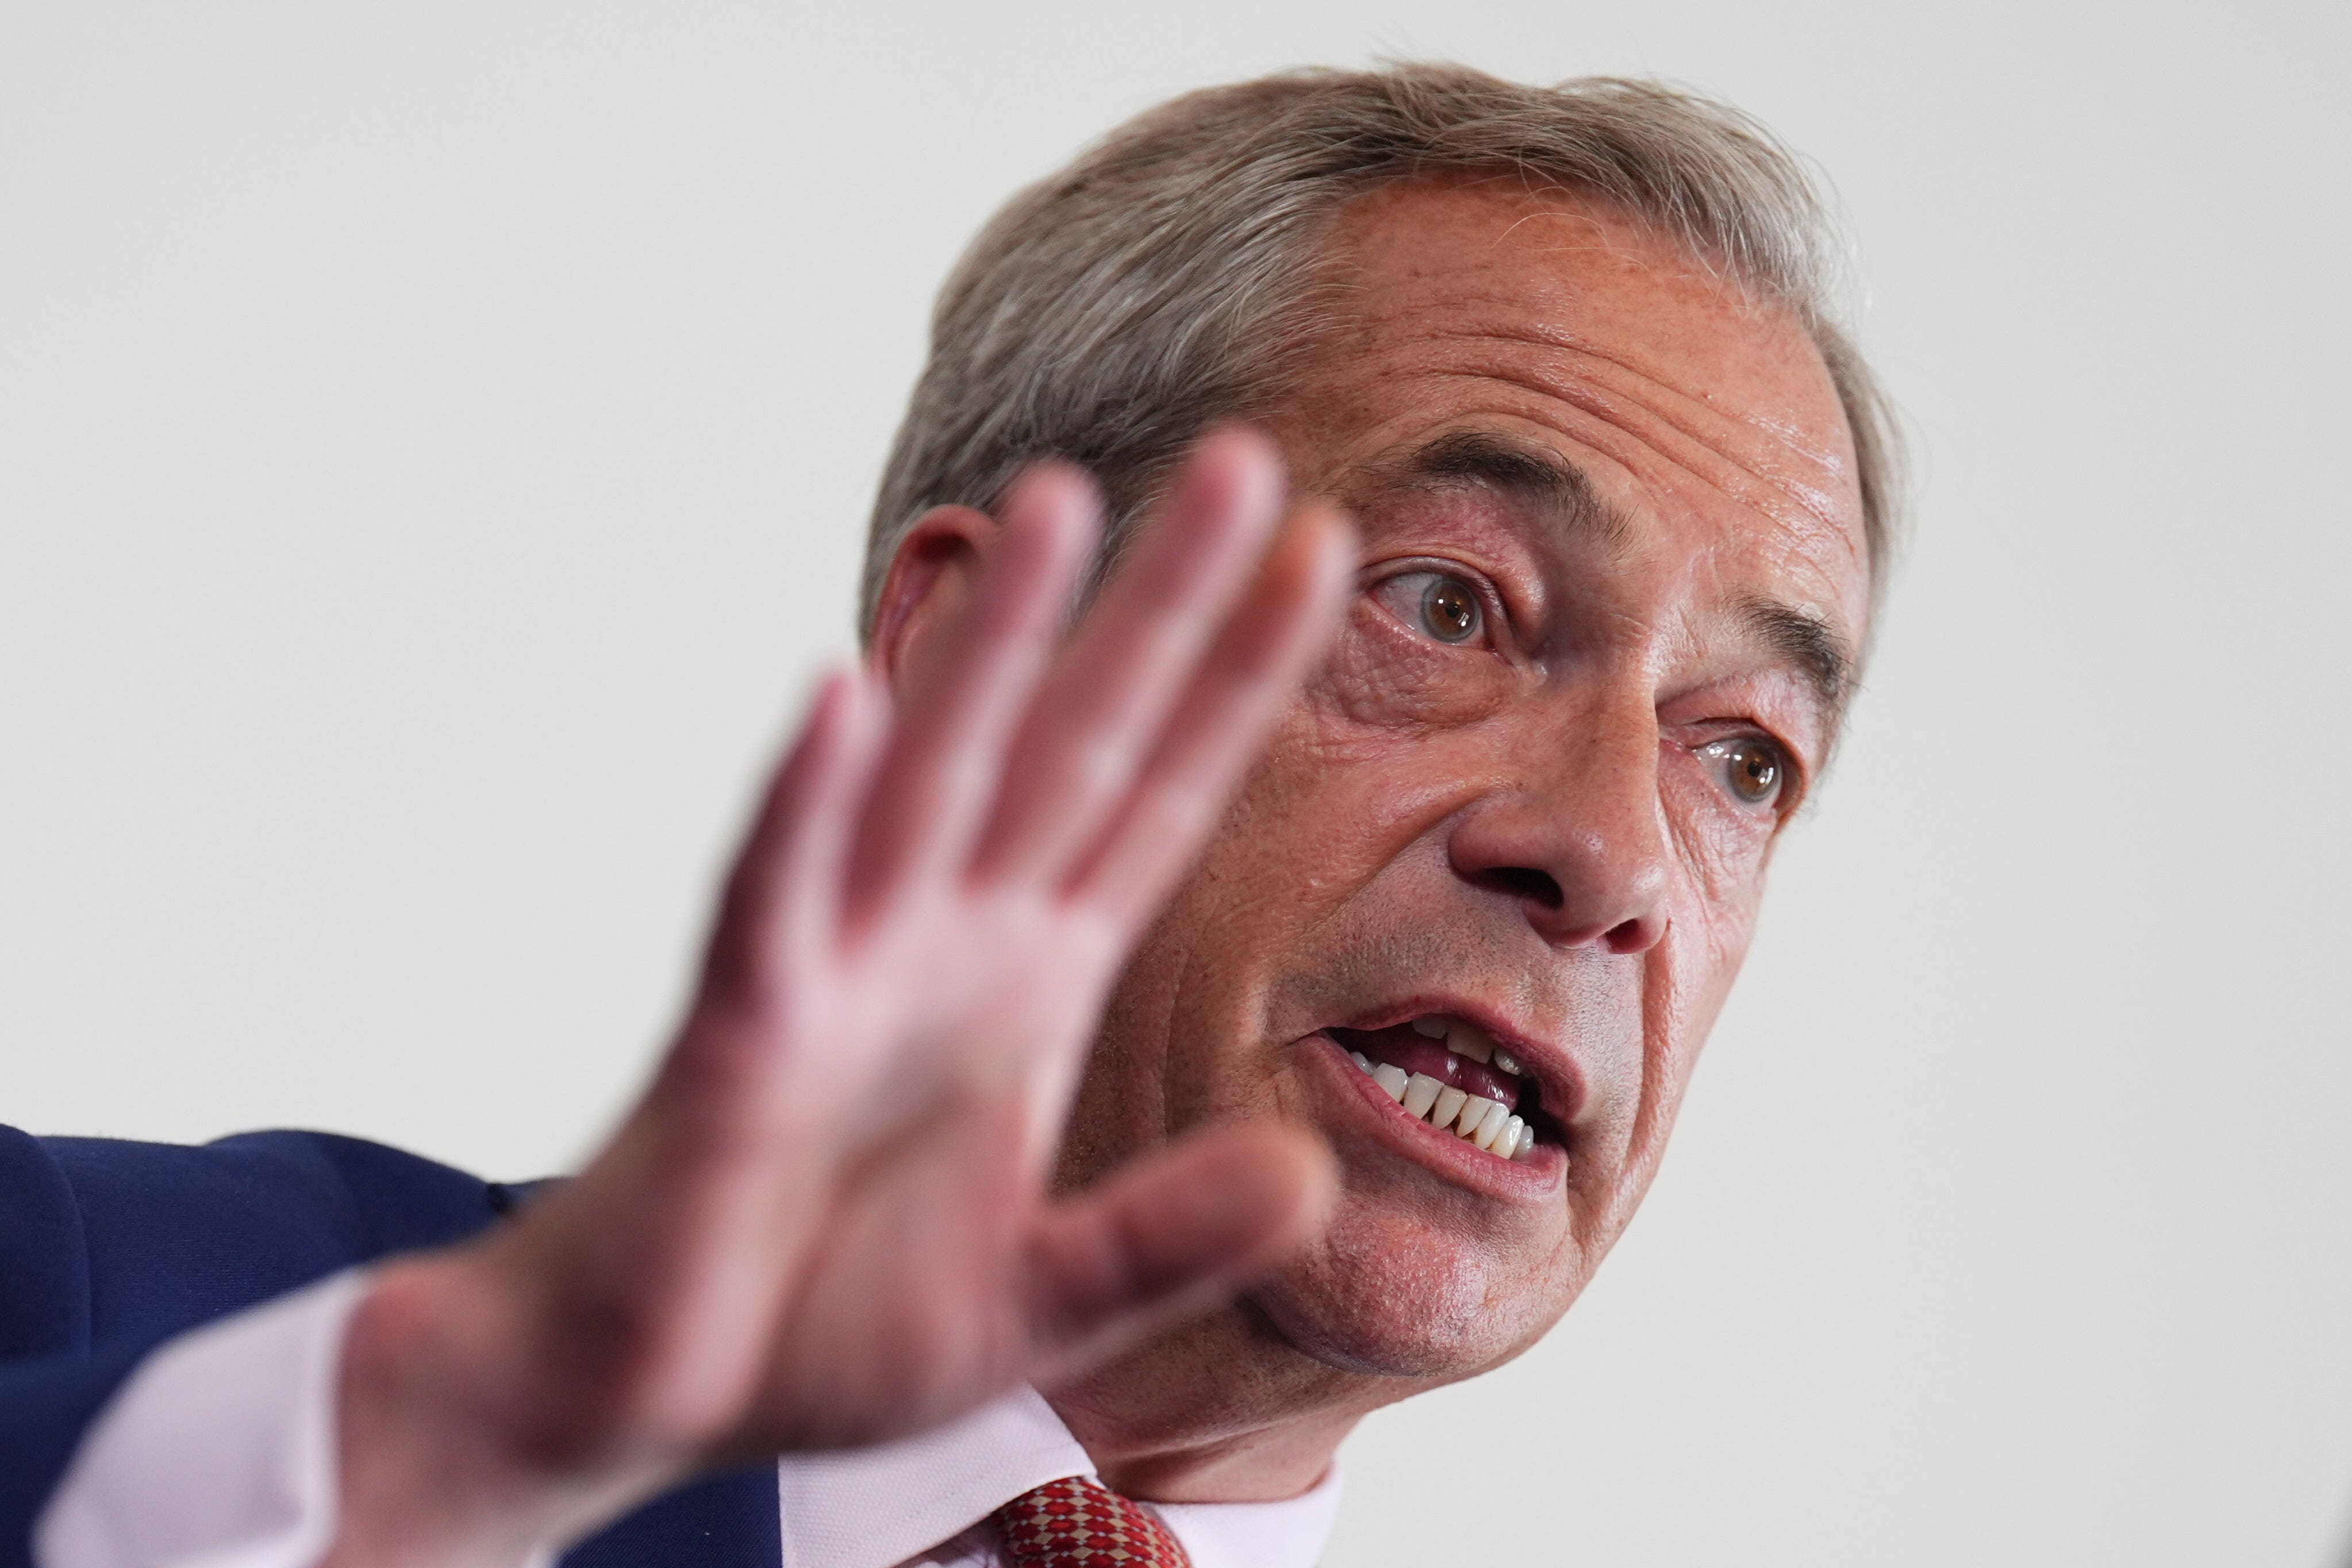 Reform UK leader Nigel Farage says his party will replace the Tories